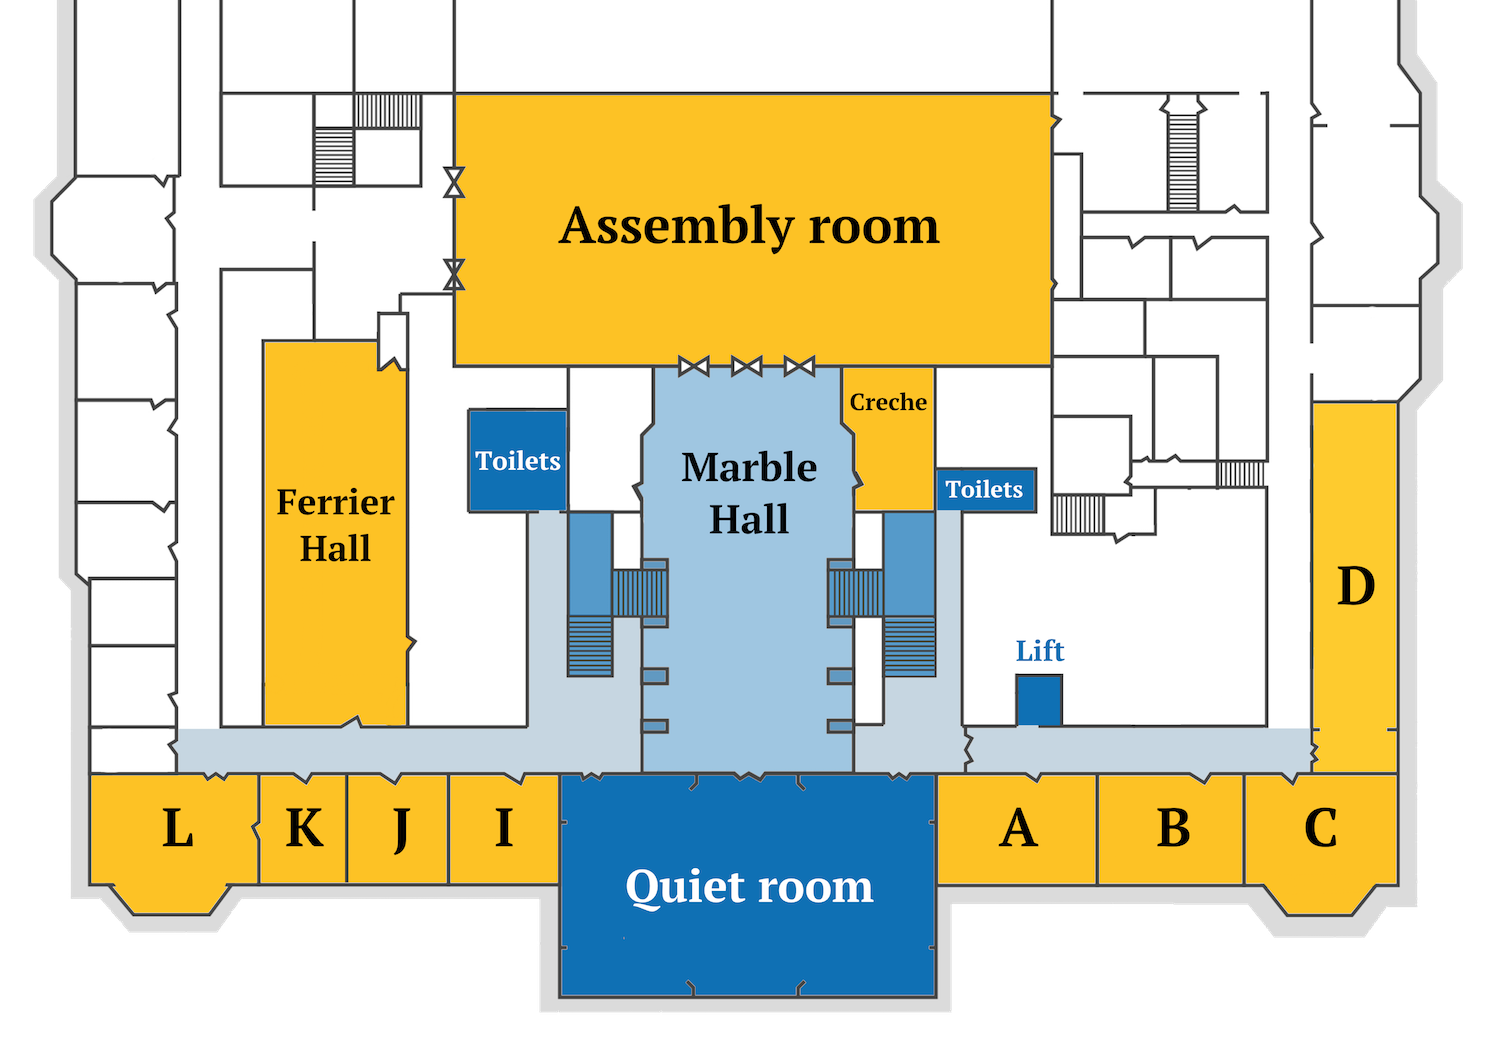 A labelled first floor plan showing the locations of the assembly room, ferrier hall, rooms A to D and rooms I to L, the quiet room, toilets and lifts.